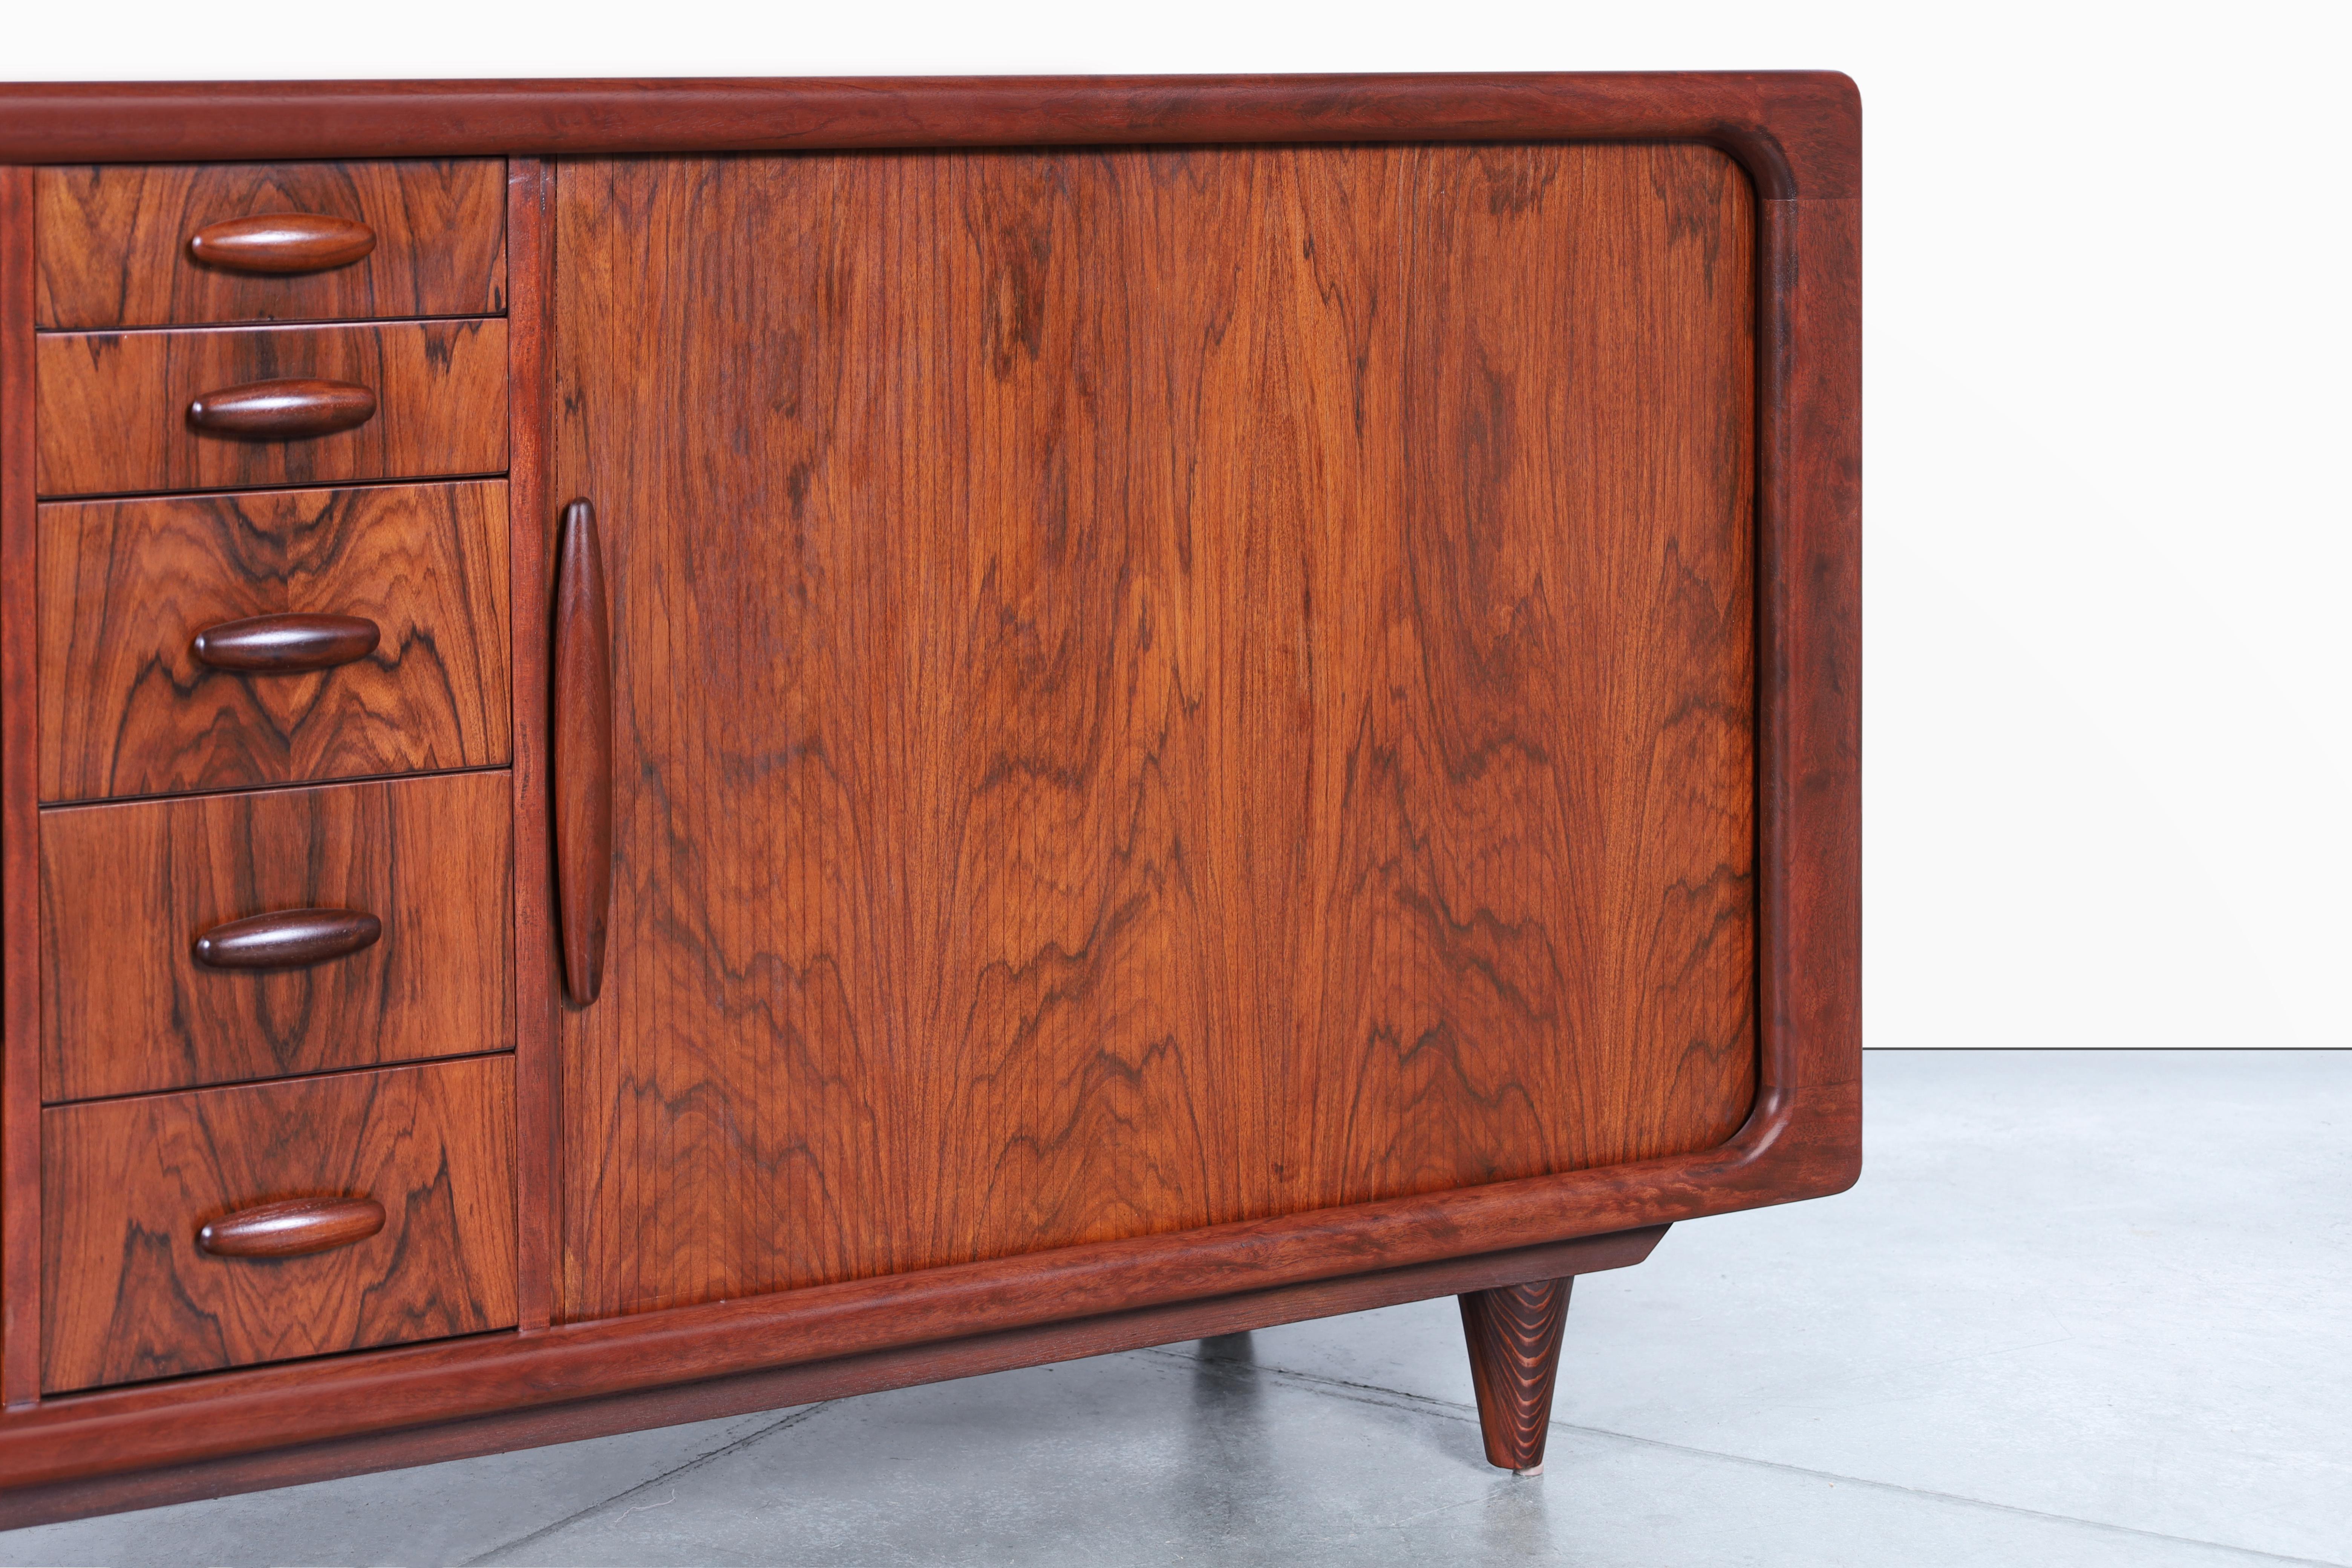 Danish Modern Rosewood Tambour Door Credenza by Dyrlund In Excellent Condition For Sale In North Hollywood, CA